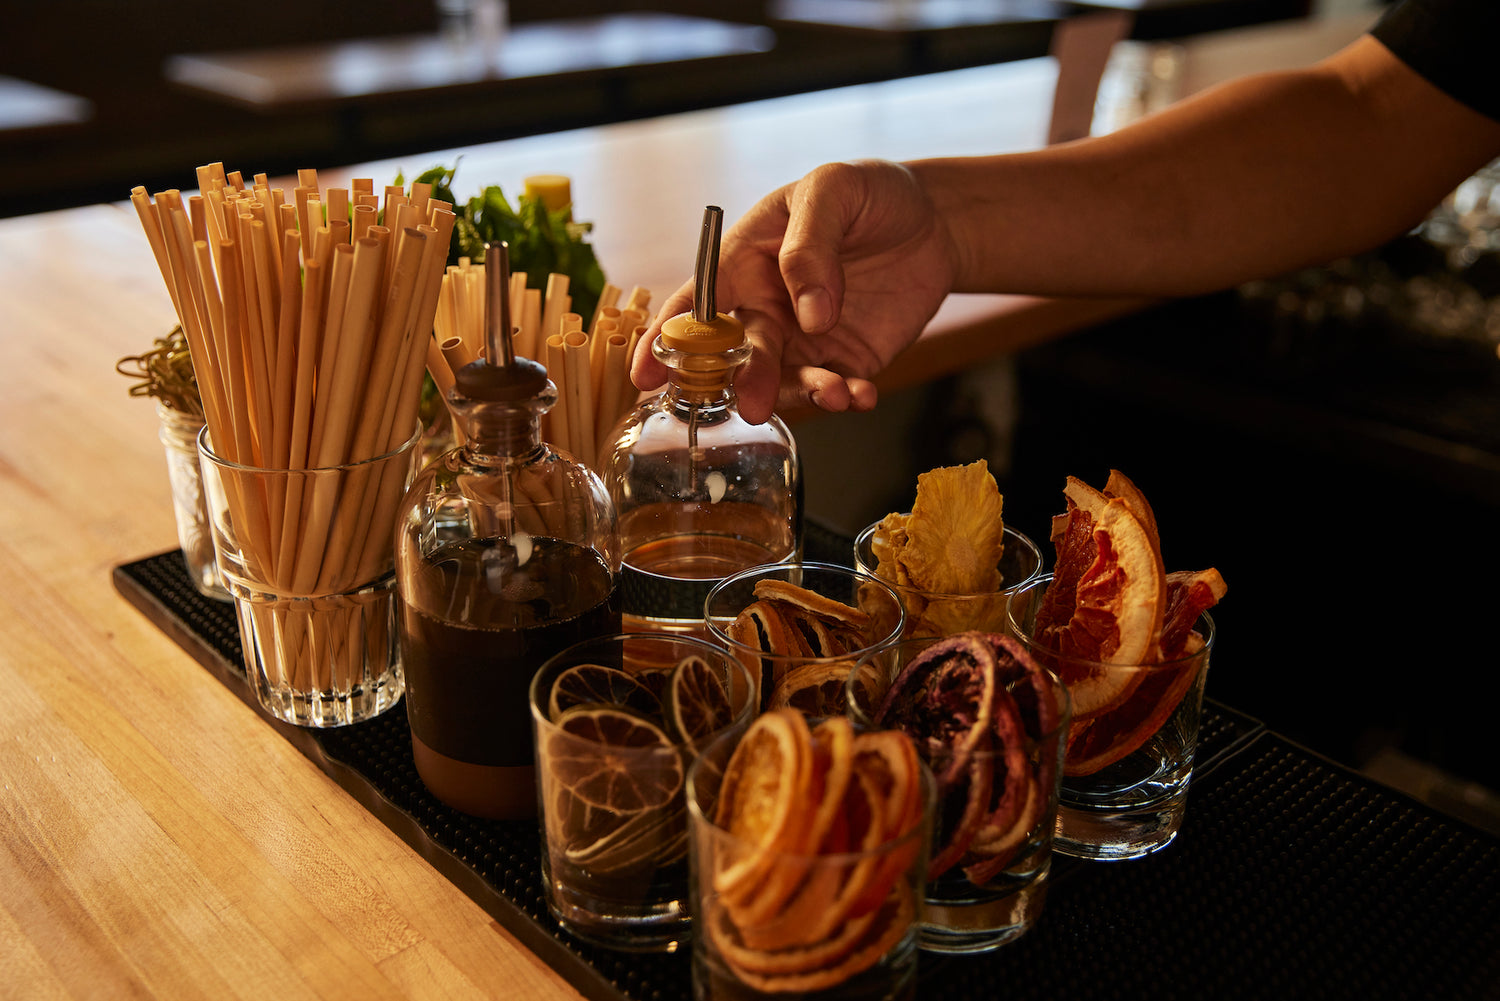 Cocktail prep station with bar supplies and dried garnishes